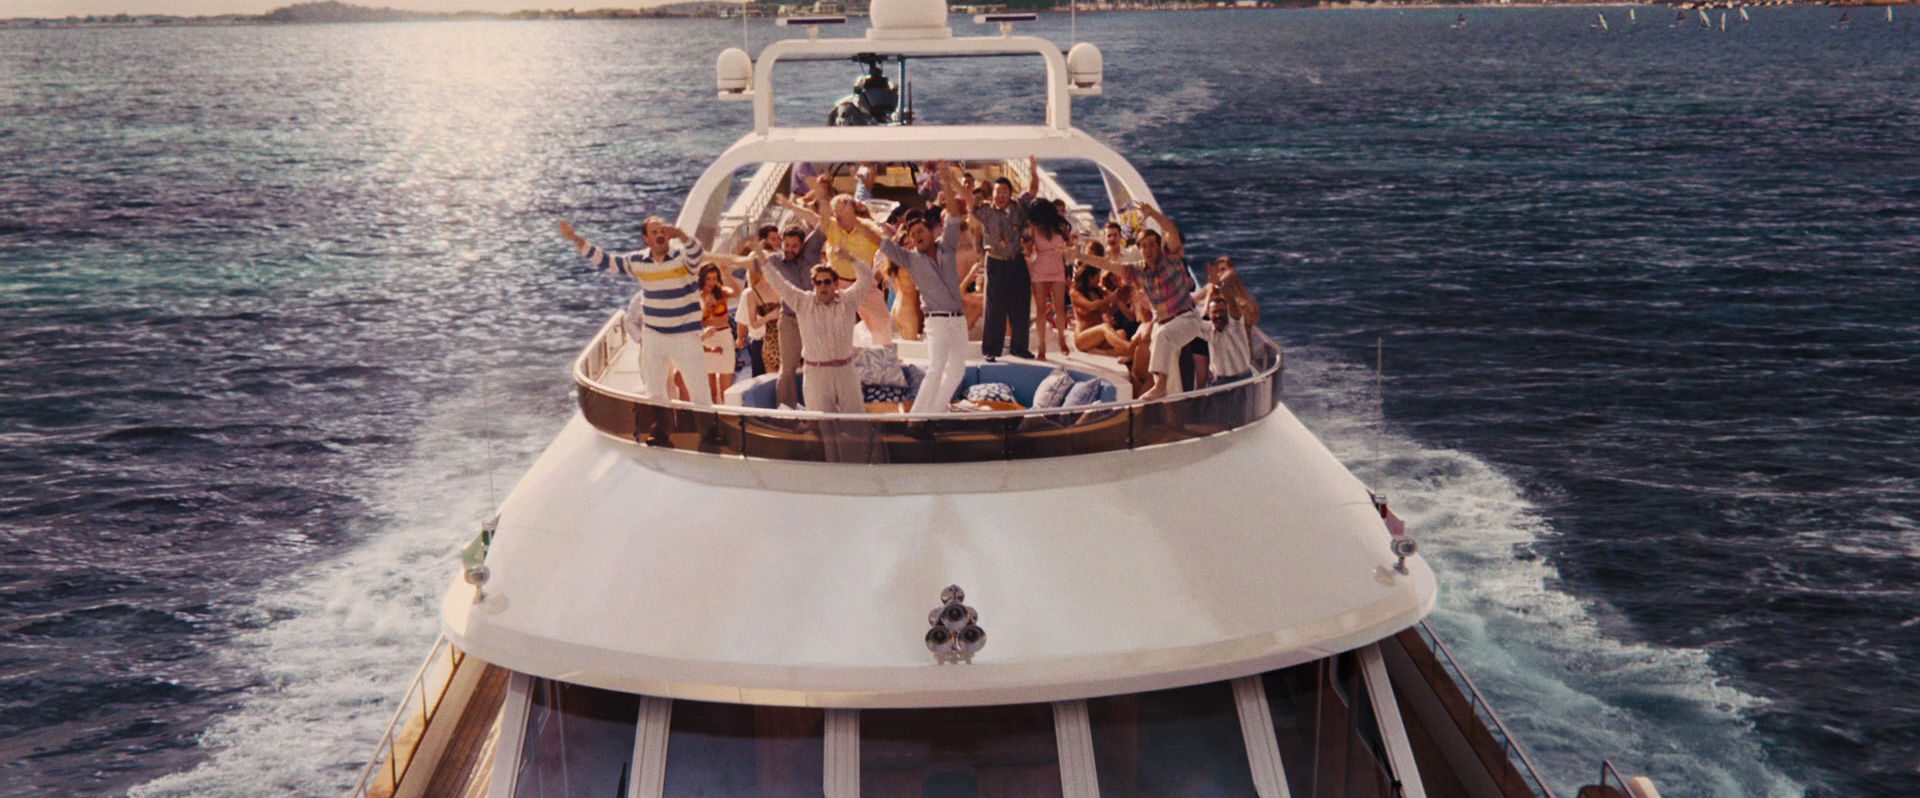 Wolf Of Wall Street Boat